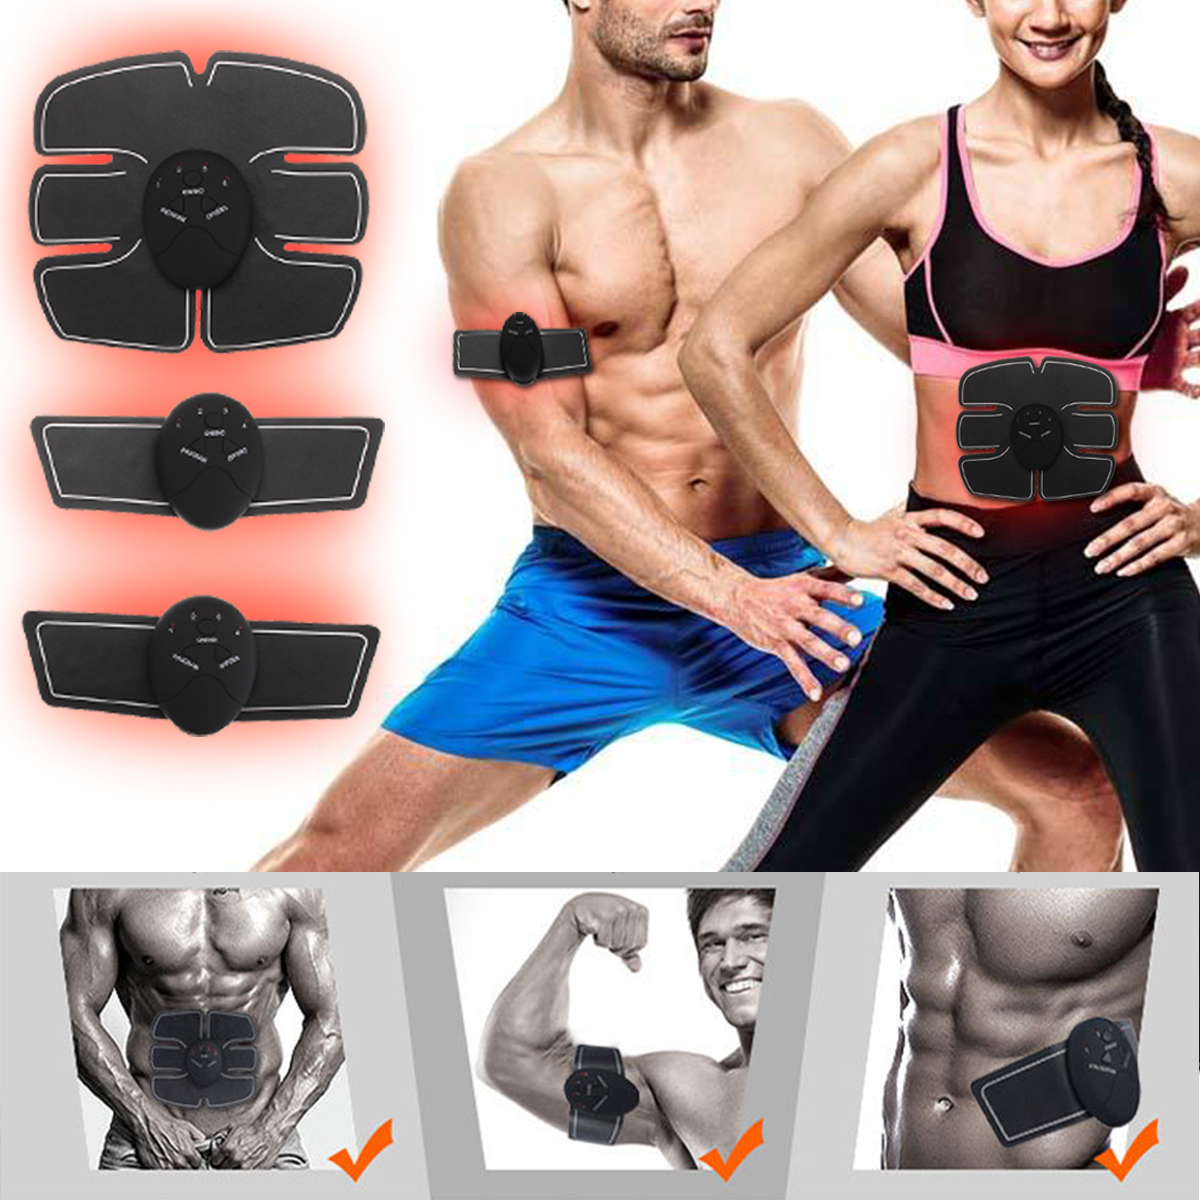 6-Modes-Smart-Abdominal-Muscle-Trainer-Abdomen-Arm-Shoulder-Strength-Fitness-Exercise-Tool-ABS-Stimu-1642922-5